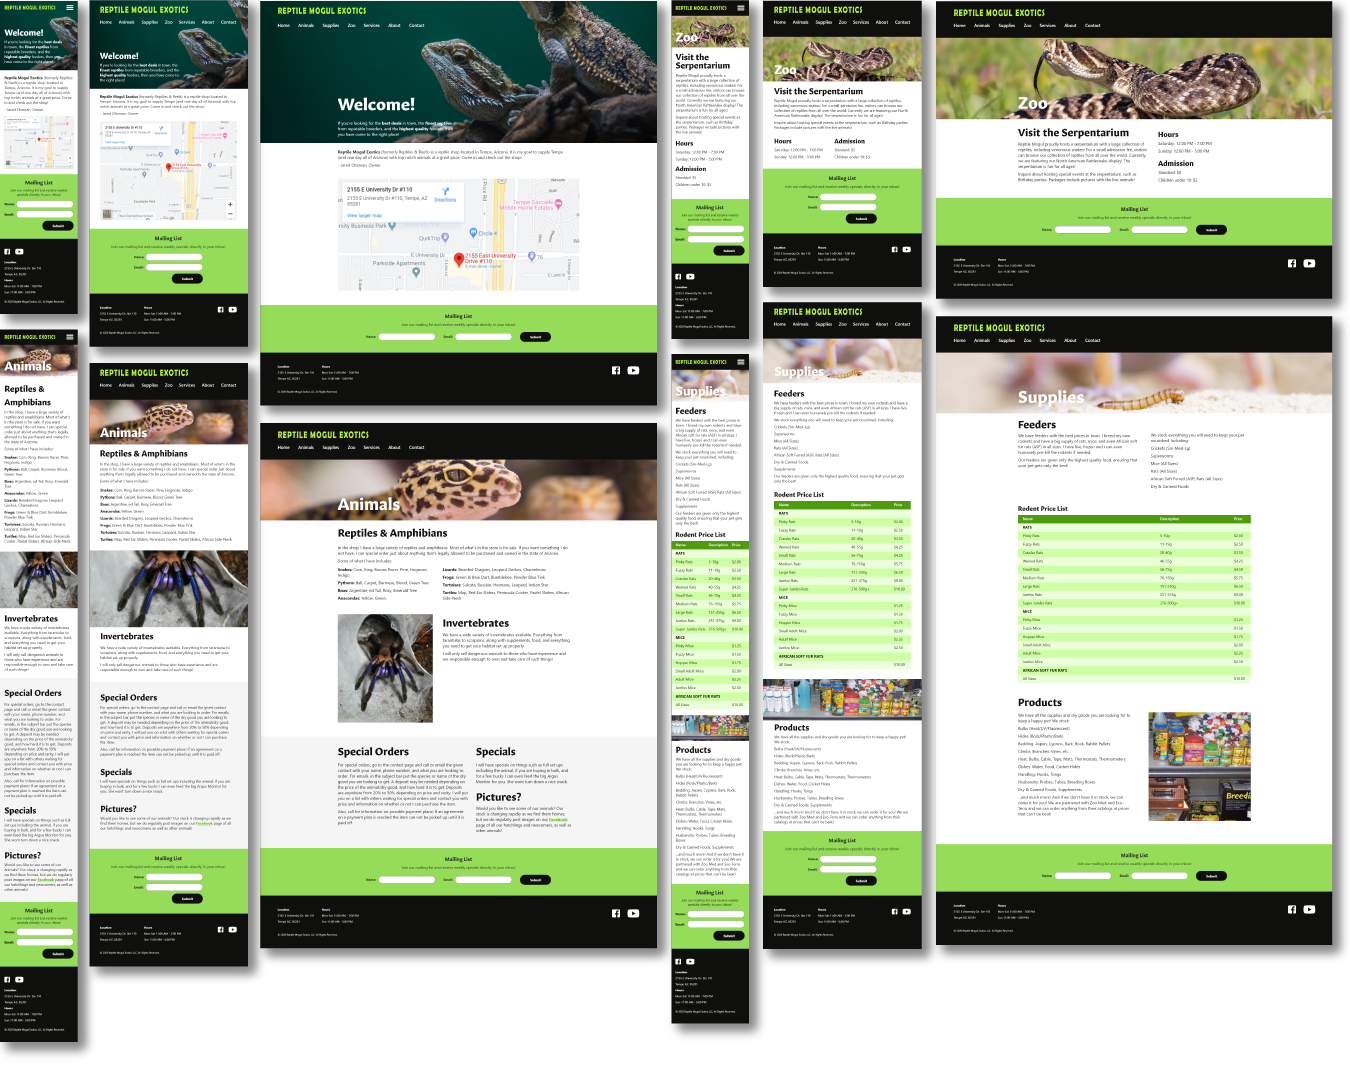 High-fidelity mockups of the mobile, tablet, and desktop versions of the home page, trailer page, and newsletter sign-up form.